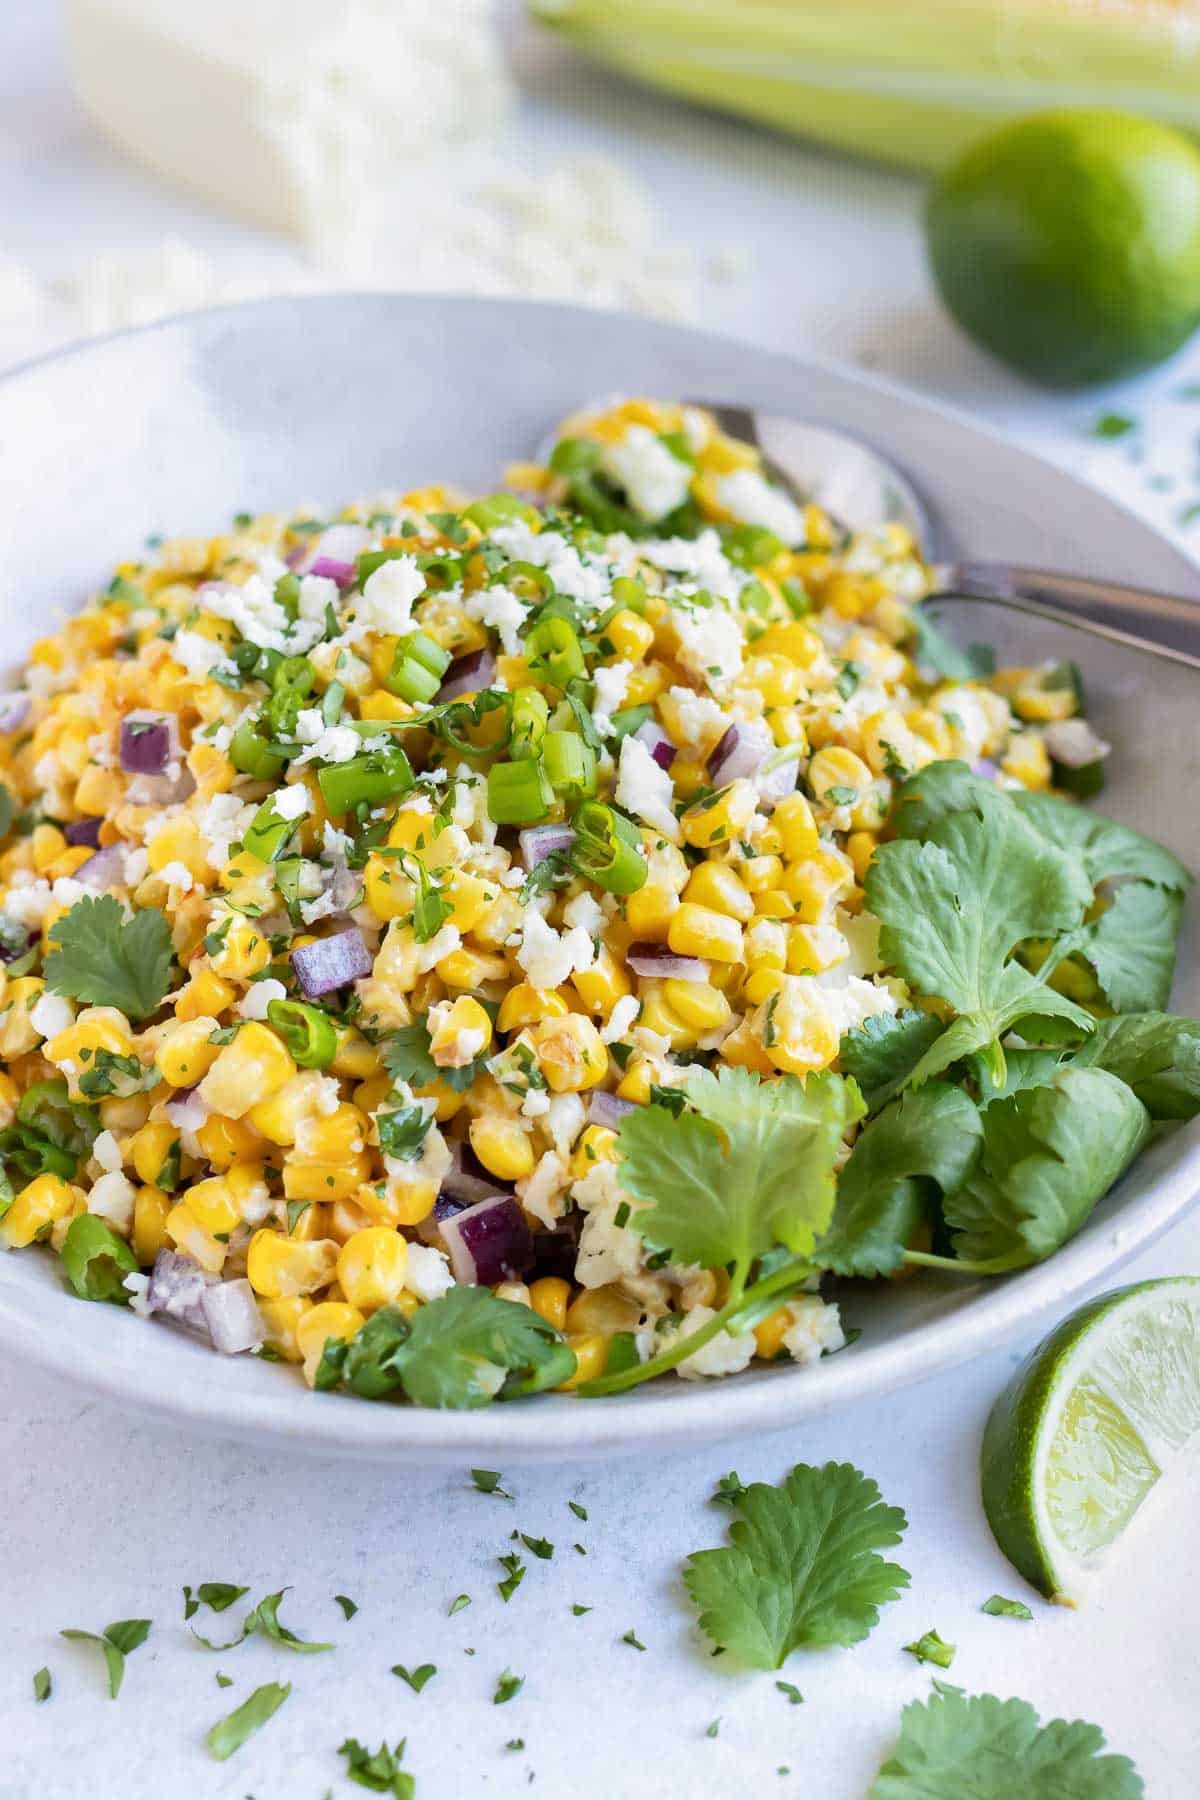 Mexican street corn salad with cilantro and limes in a white serving bowl.